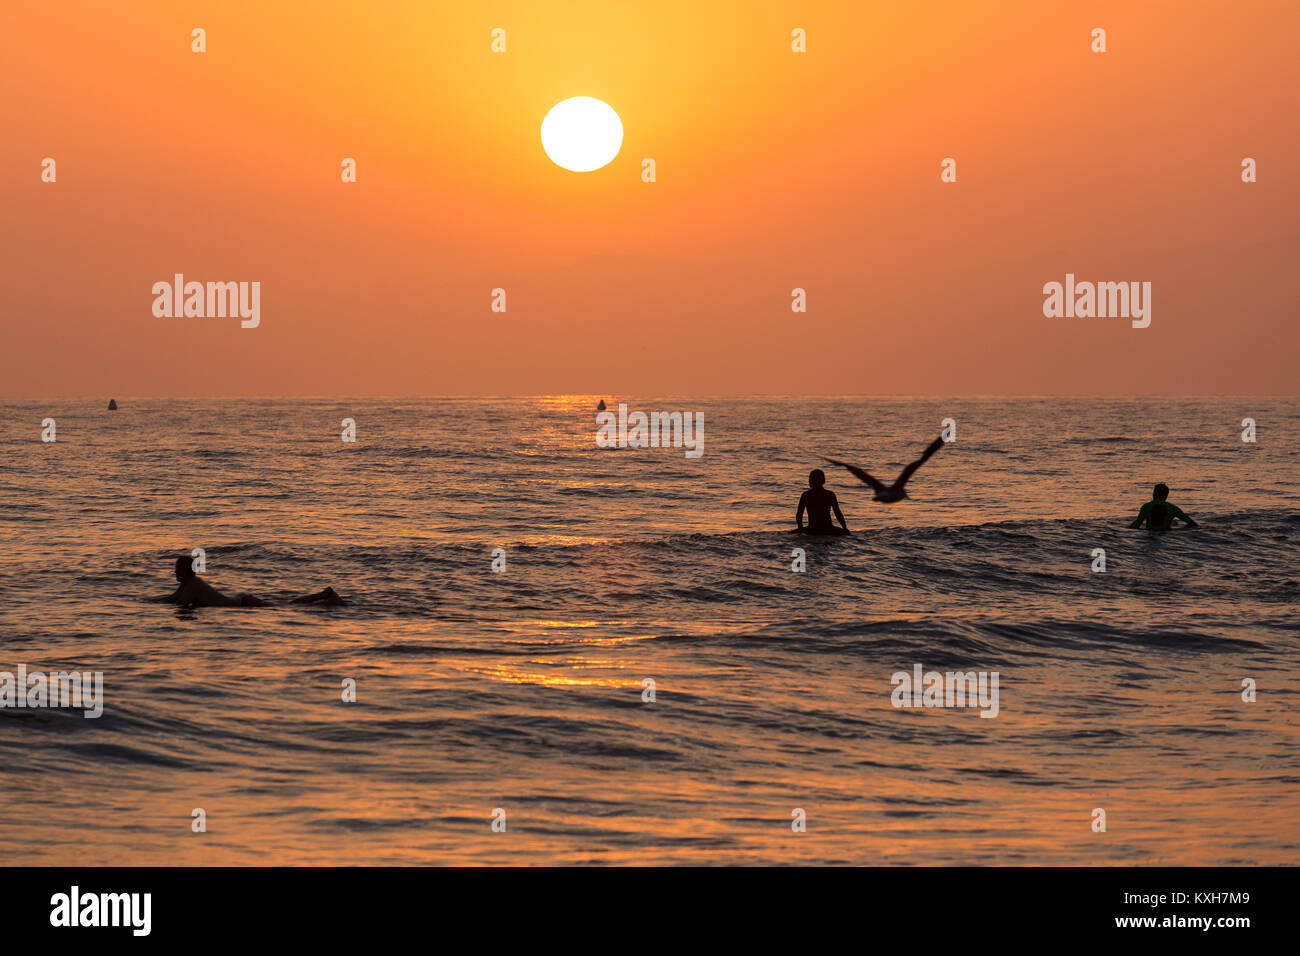 Surfers are silhouetted against the setting sun over the ocean in Los Angeles, California. Stock Photo